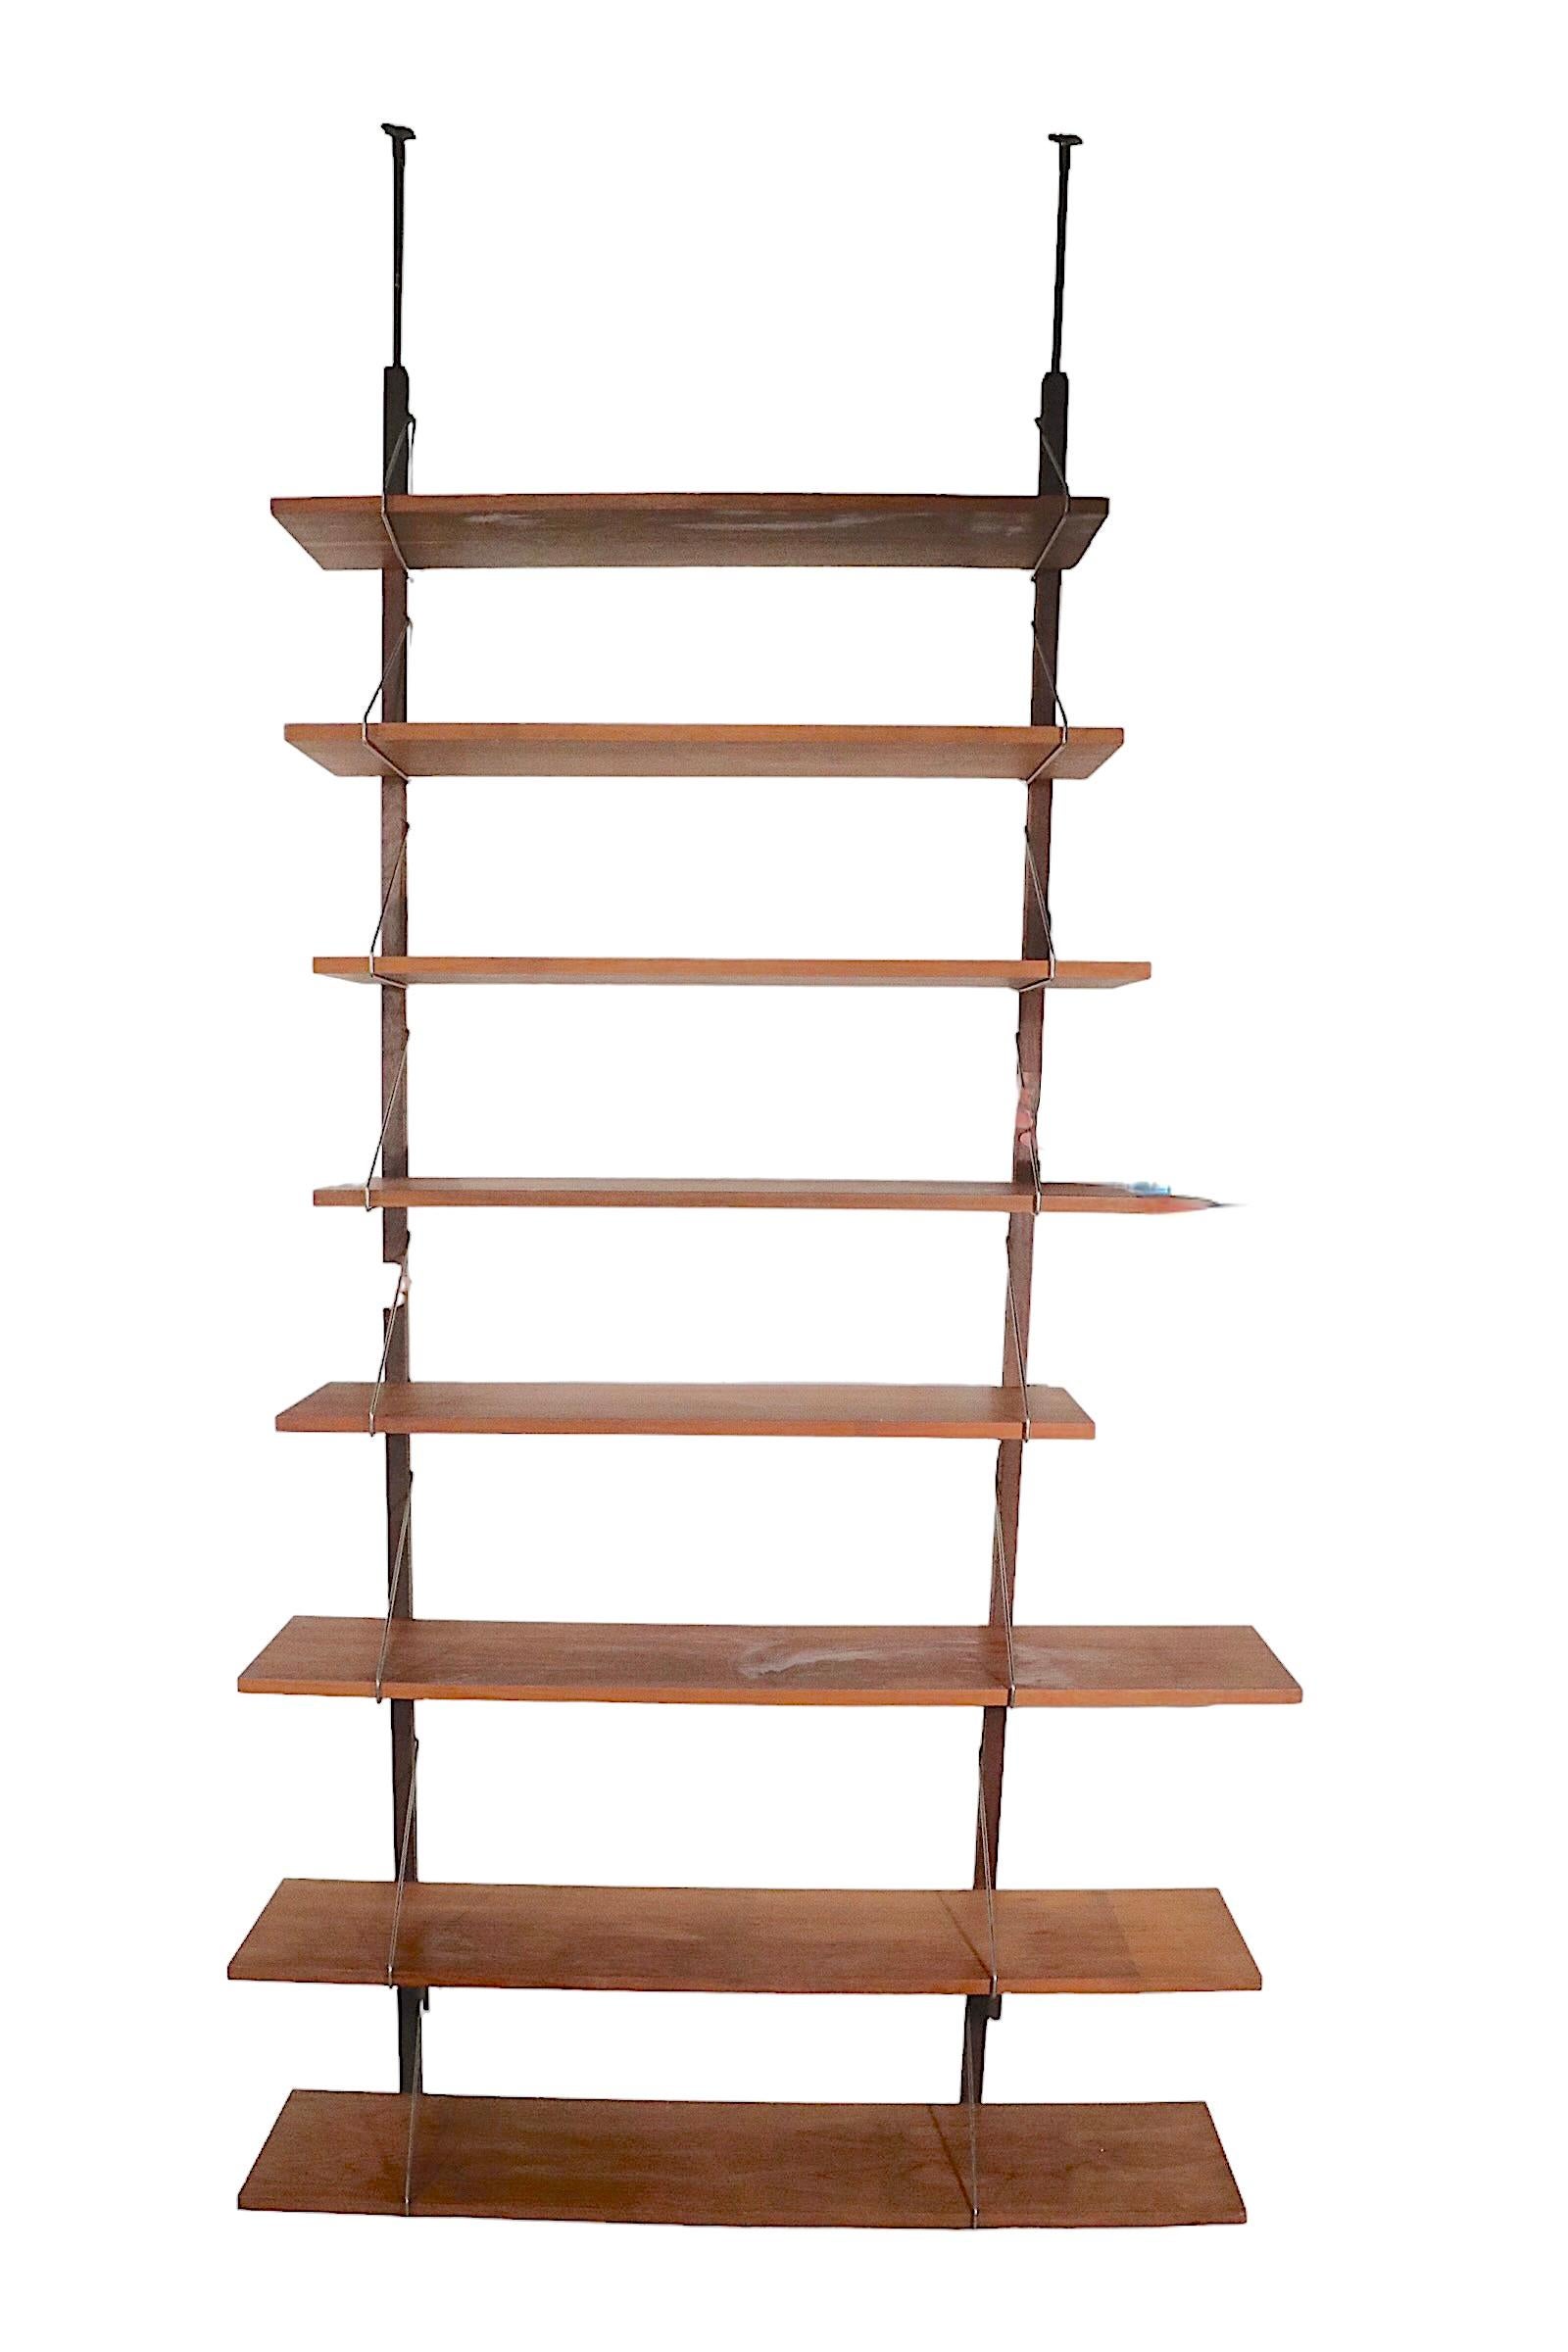 Danish Mid Century Wall Unit with 8 Shelves, circa 1950 - 1960s For Sale 1